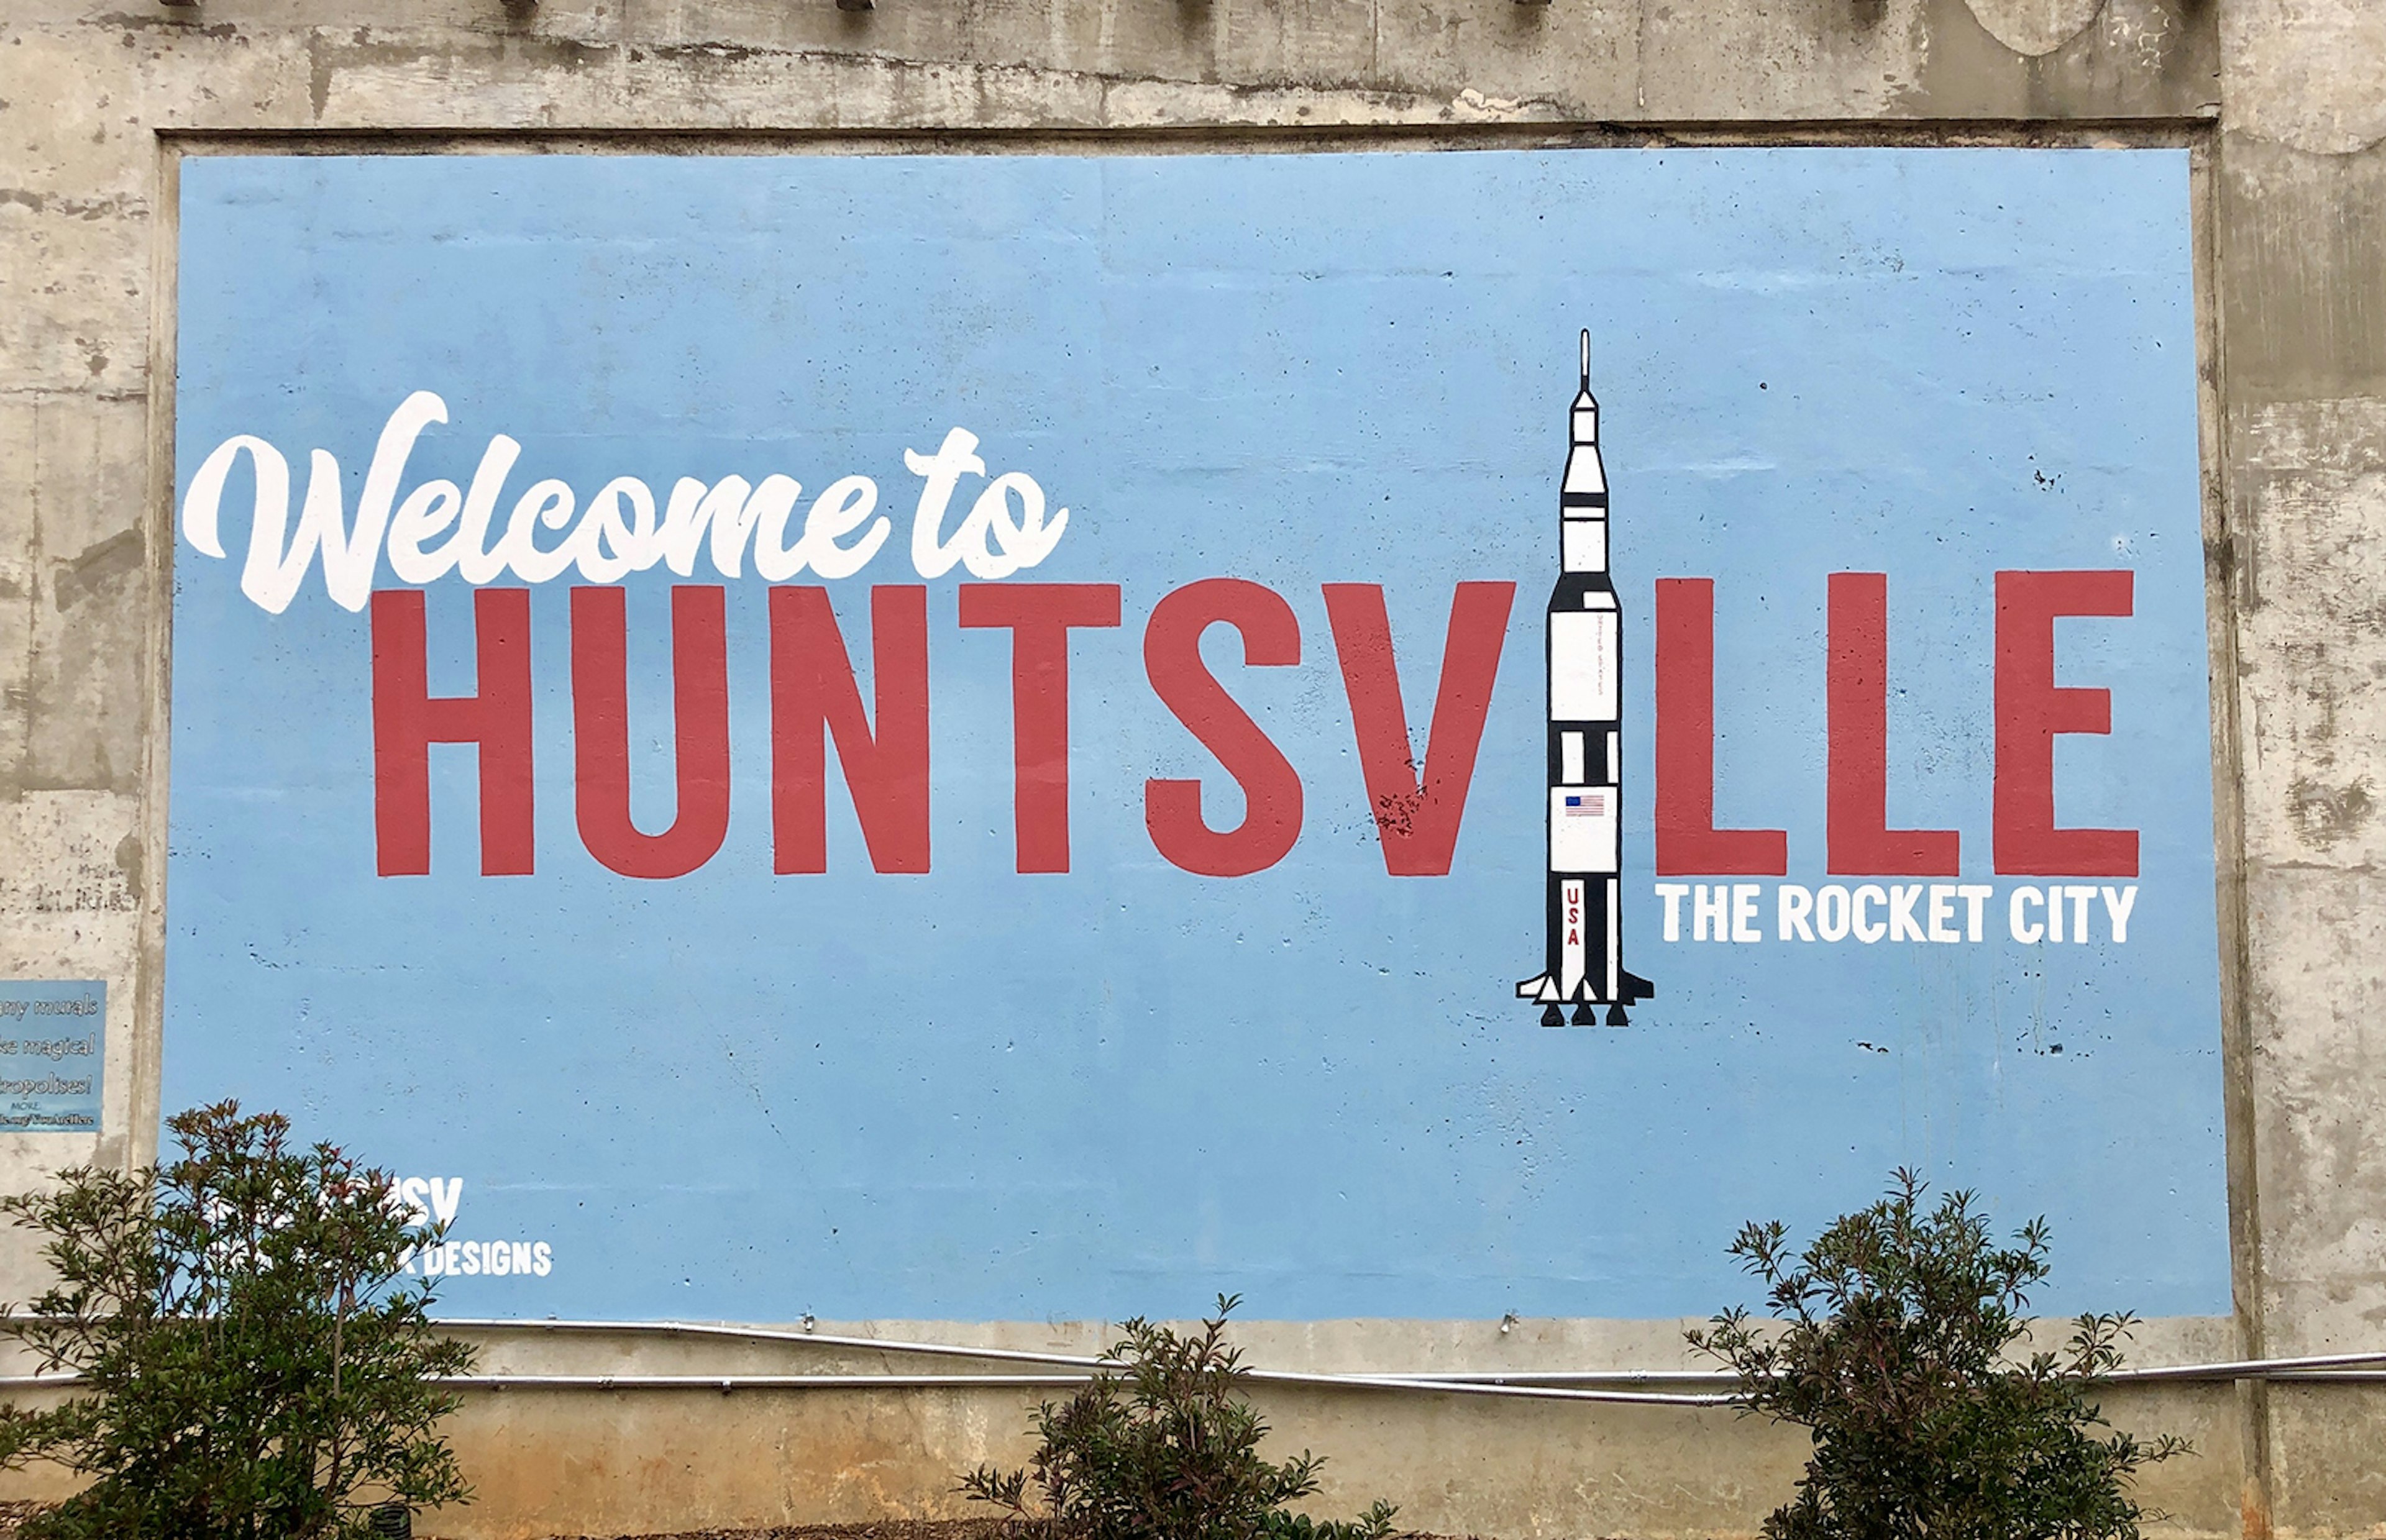 mural with blue background that includes the text "welcome to Huntsville." The "I" in Huntsville is a rocket ship